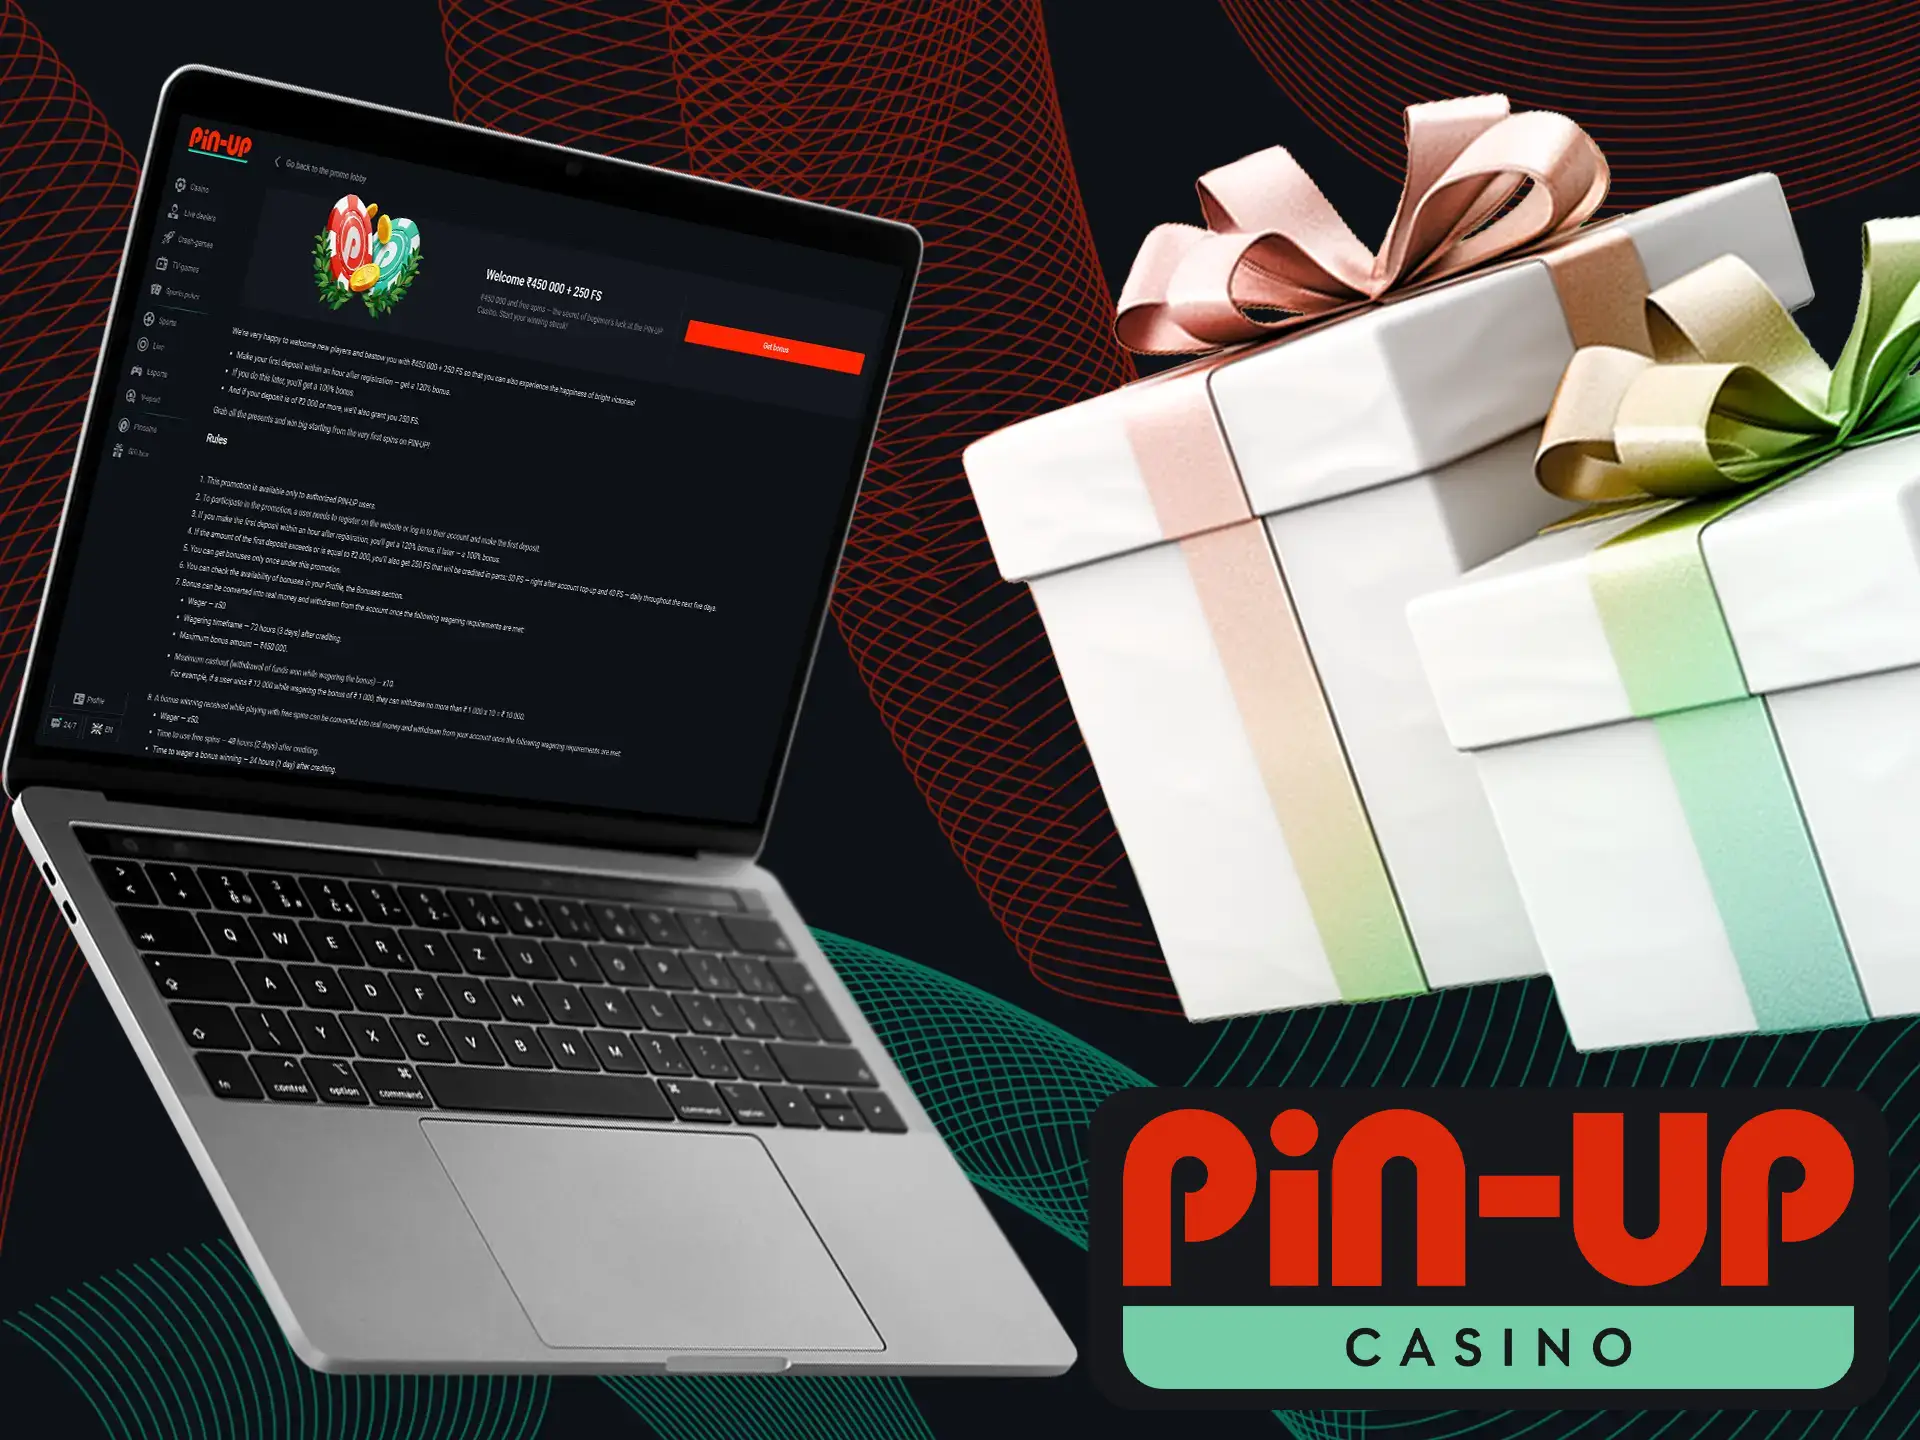 In order to enhance your enjoyment, Pin-Up Casino provides a 100% welcome bonus.